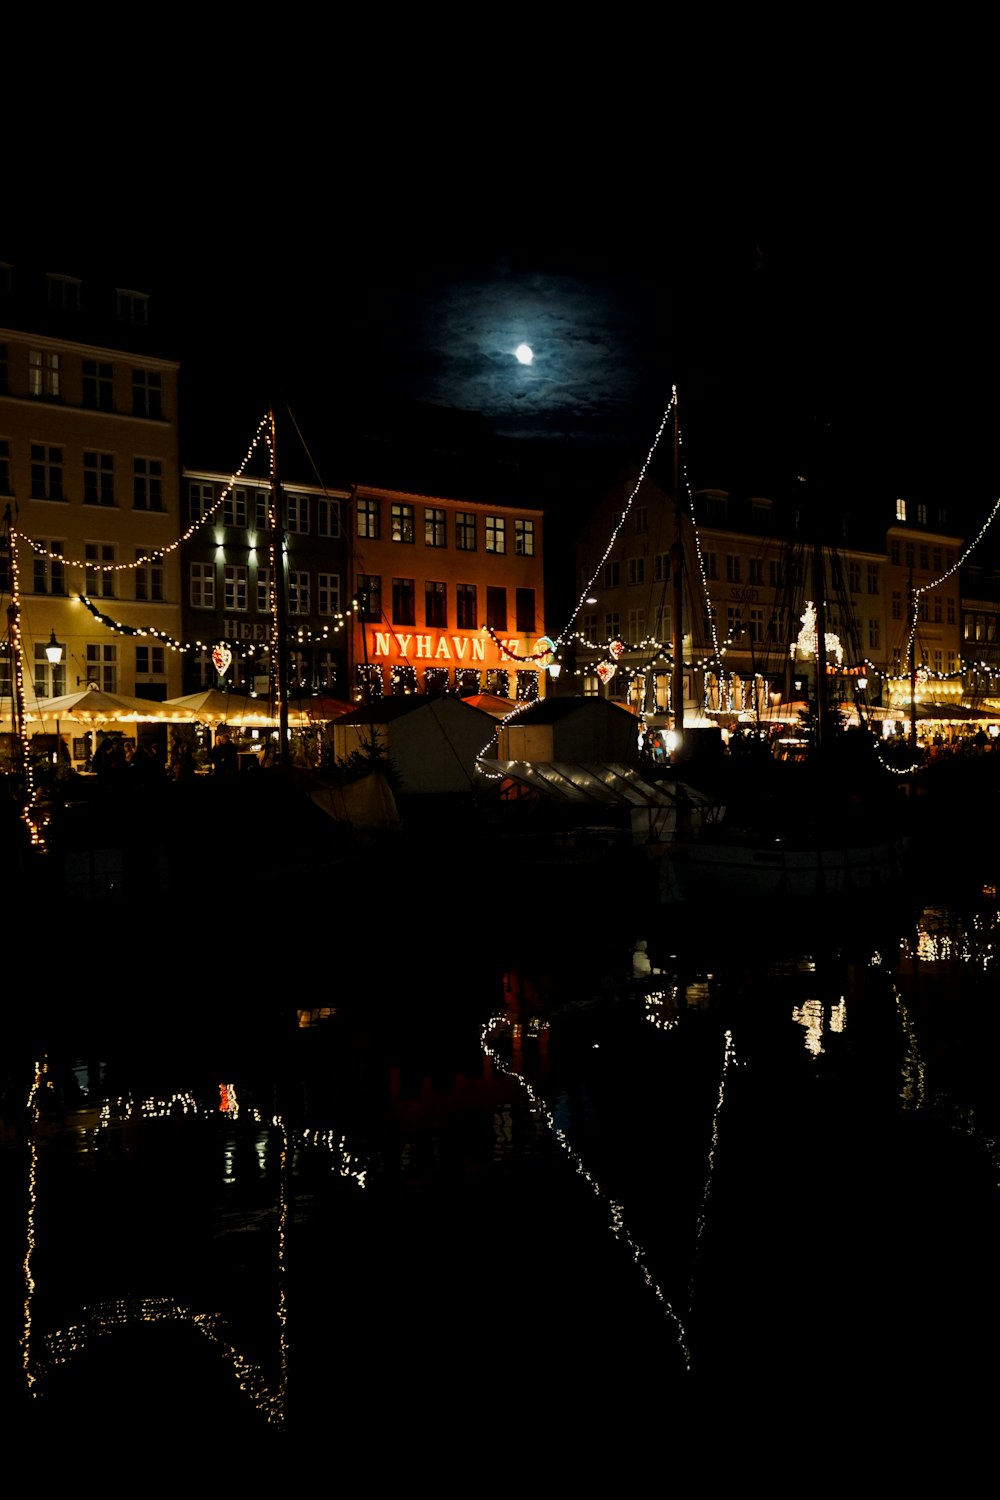 a night scene of a harbor with a full moon in the background